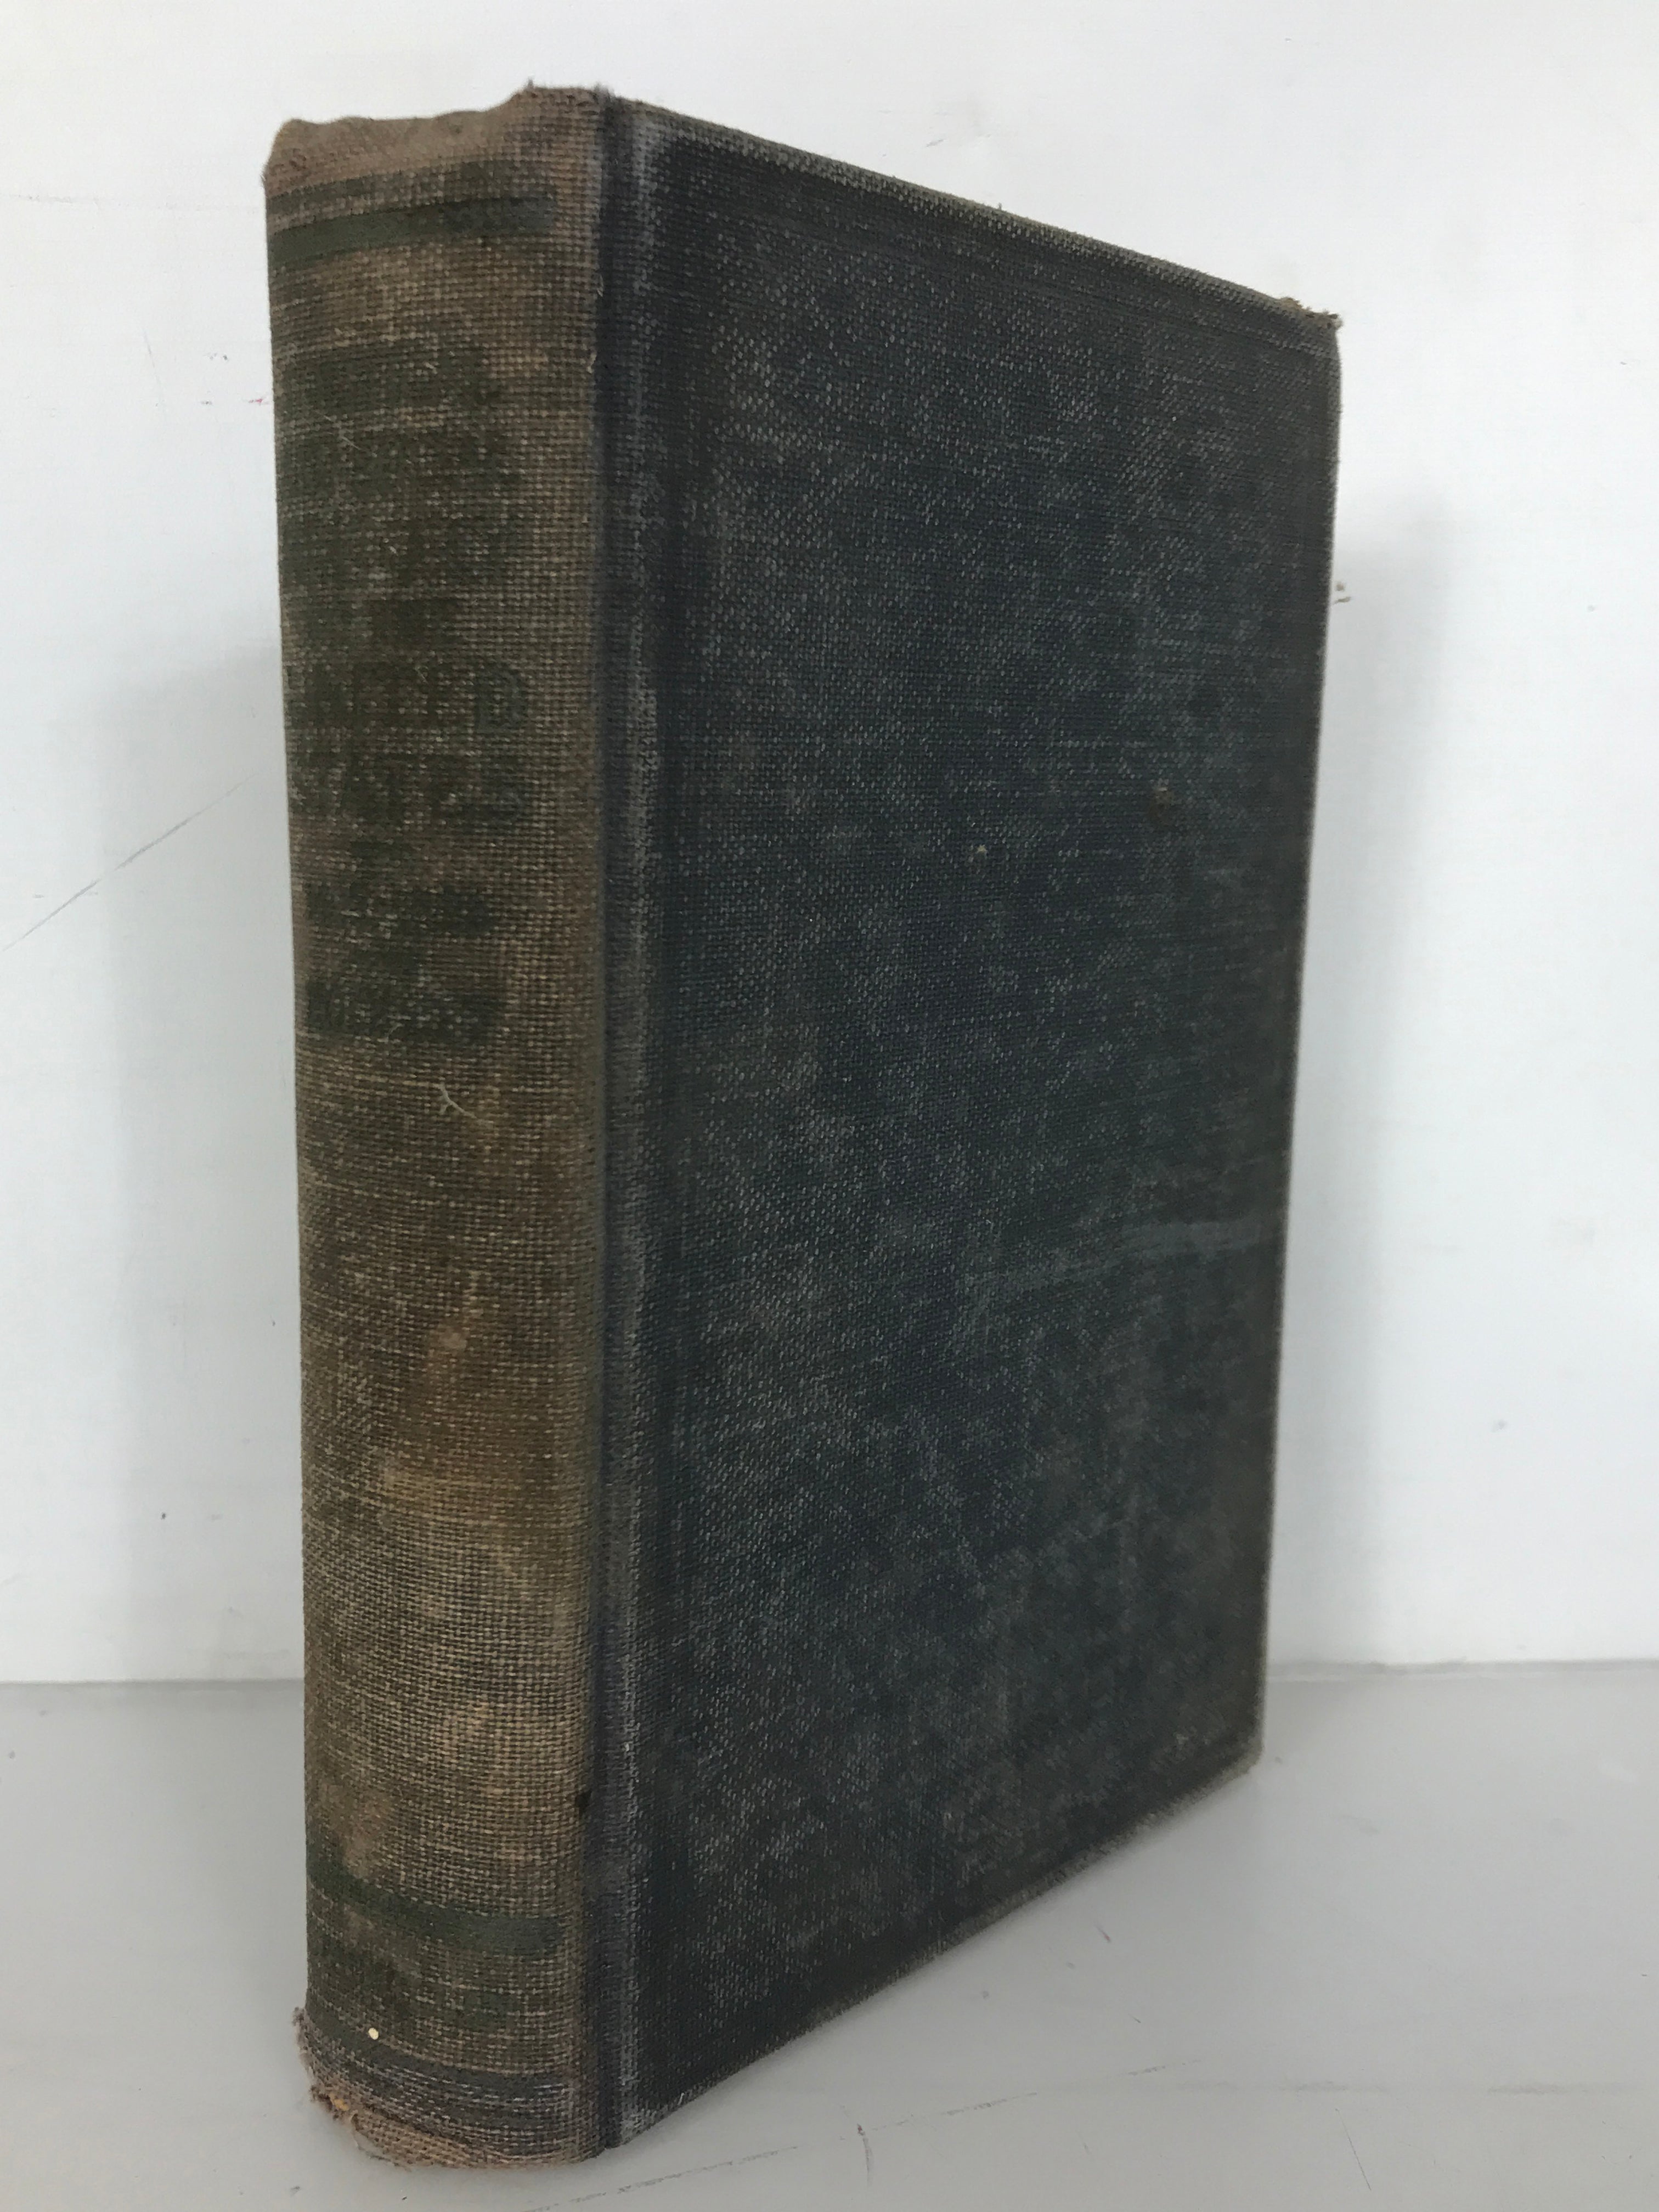 Political and Social History of the United States 1492-1828 by Hockett 1928 HC